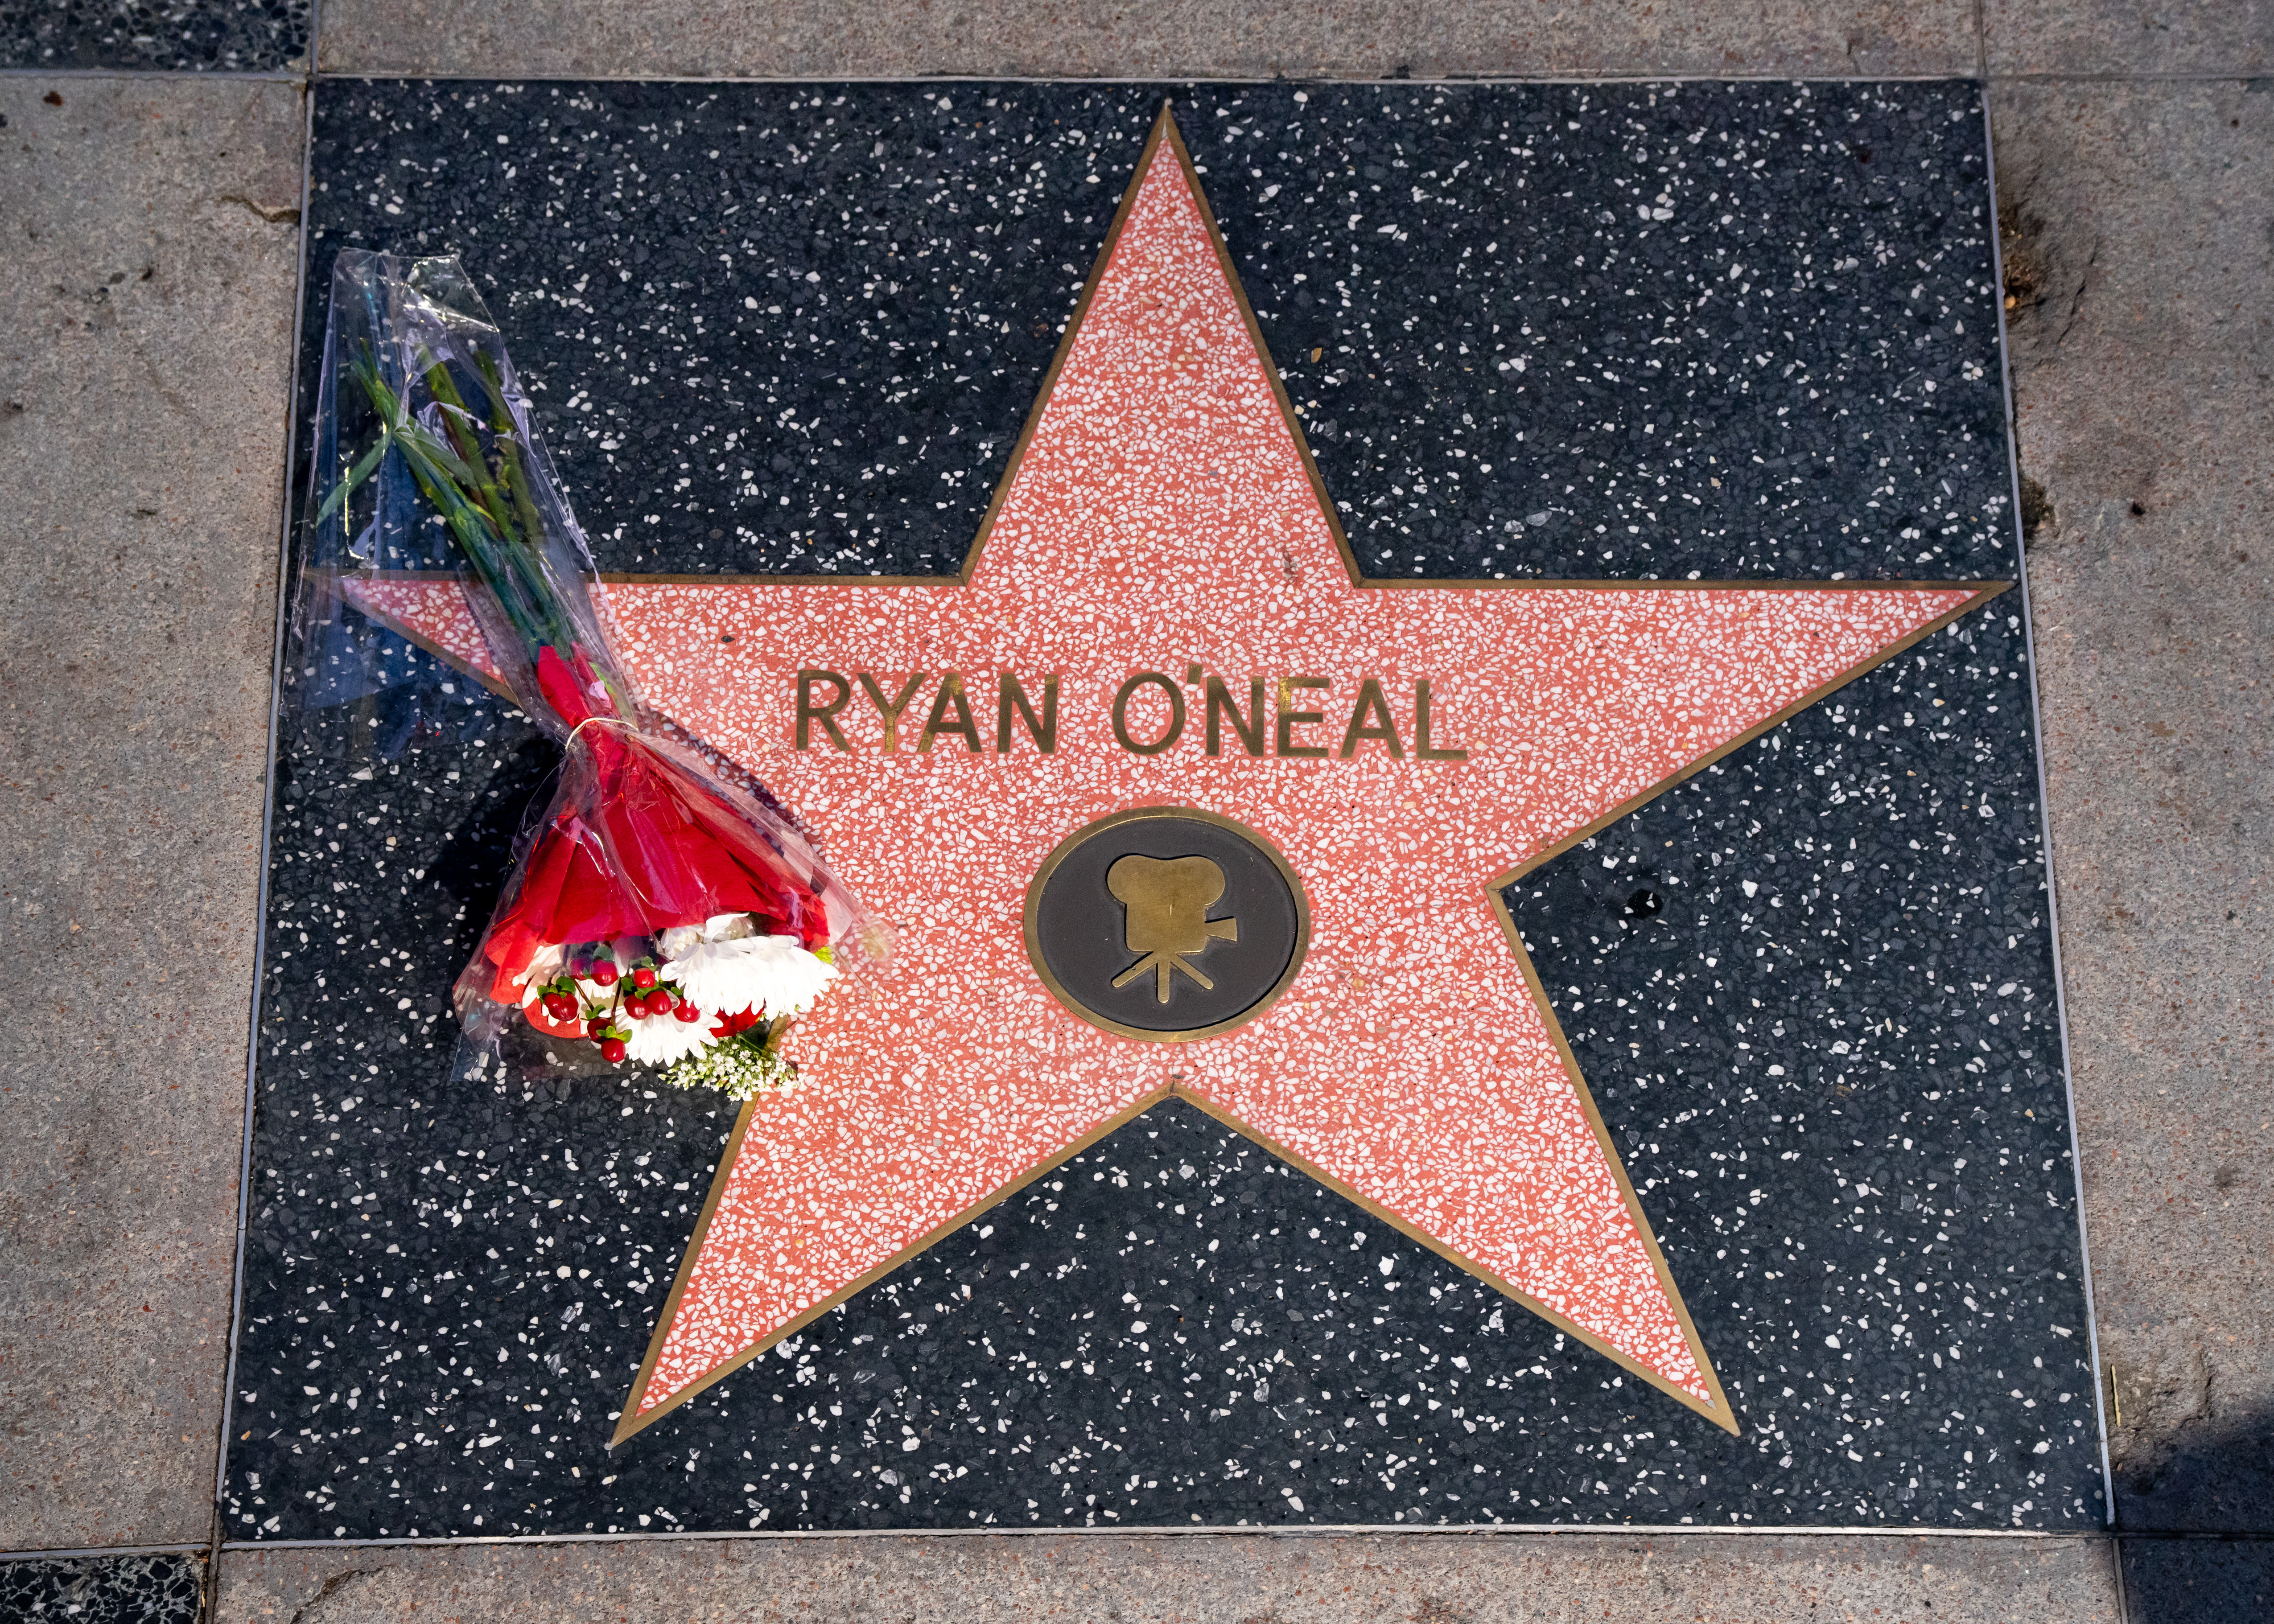 Hollywood honors Ryan O'Neal at the site of his star on the Walk of Fame after the announcement of his death on December 8, 2023, in Hollywood, California | Source: Getty Images